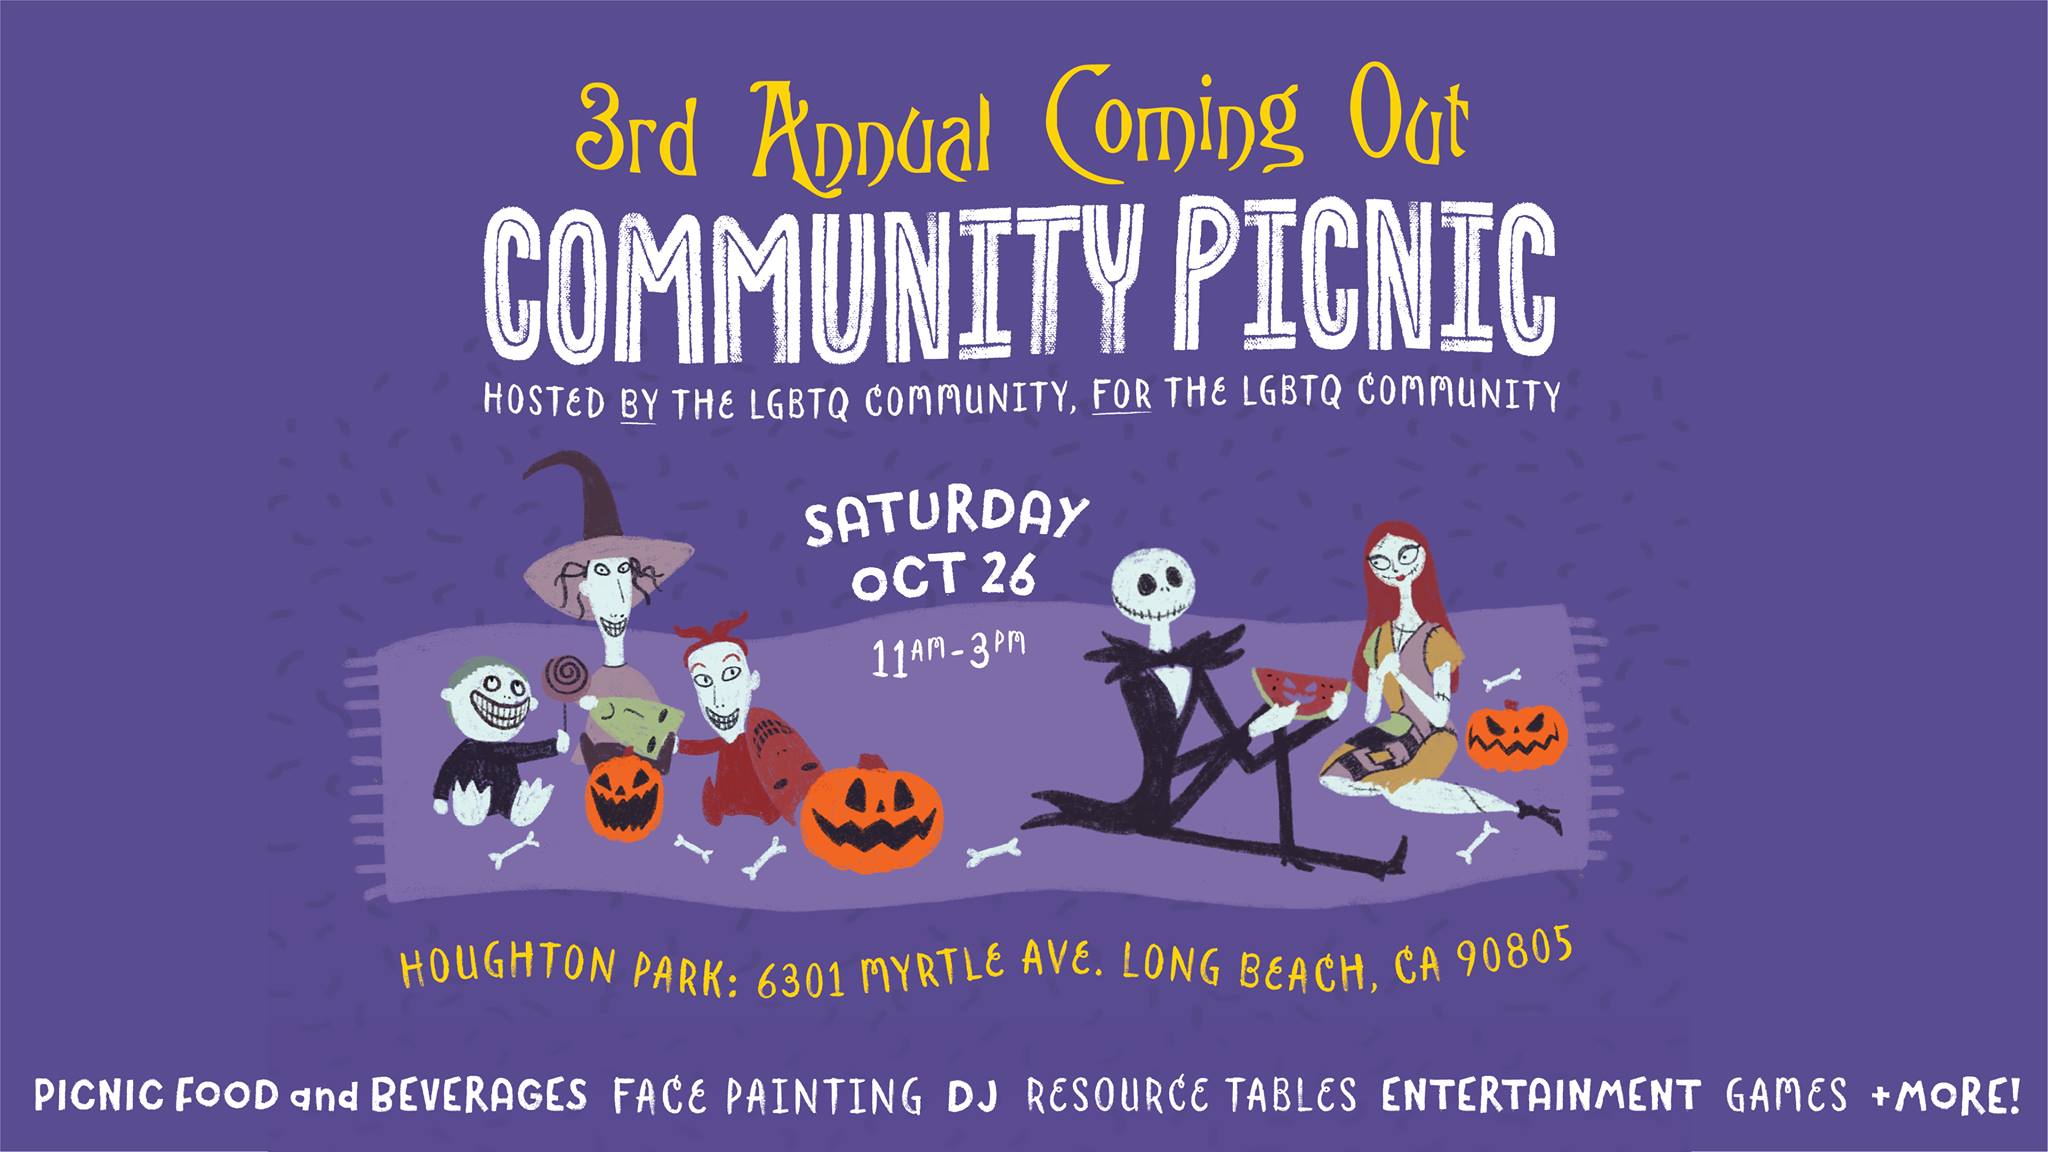 LGBTQ+ Coming Out Community Picnic Set for October 26th